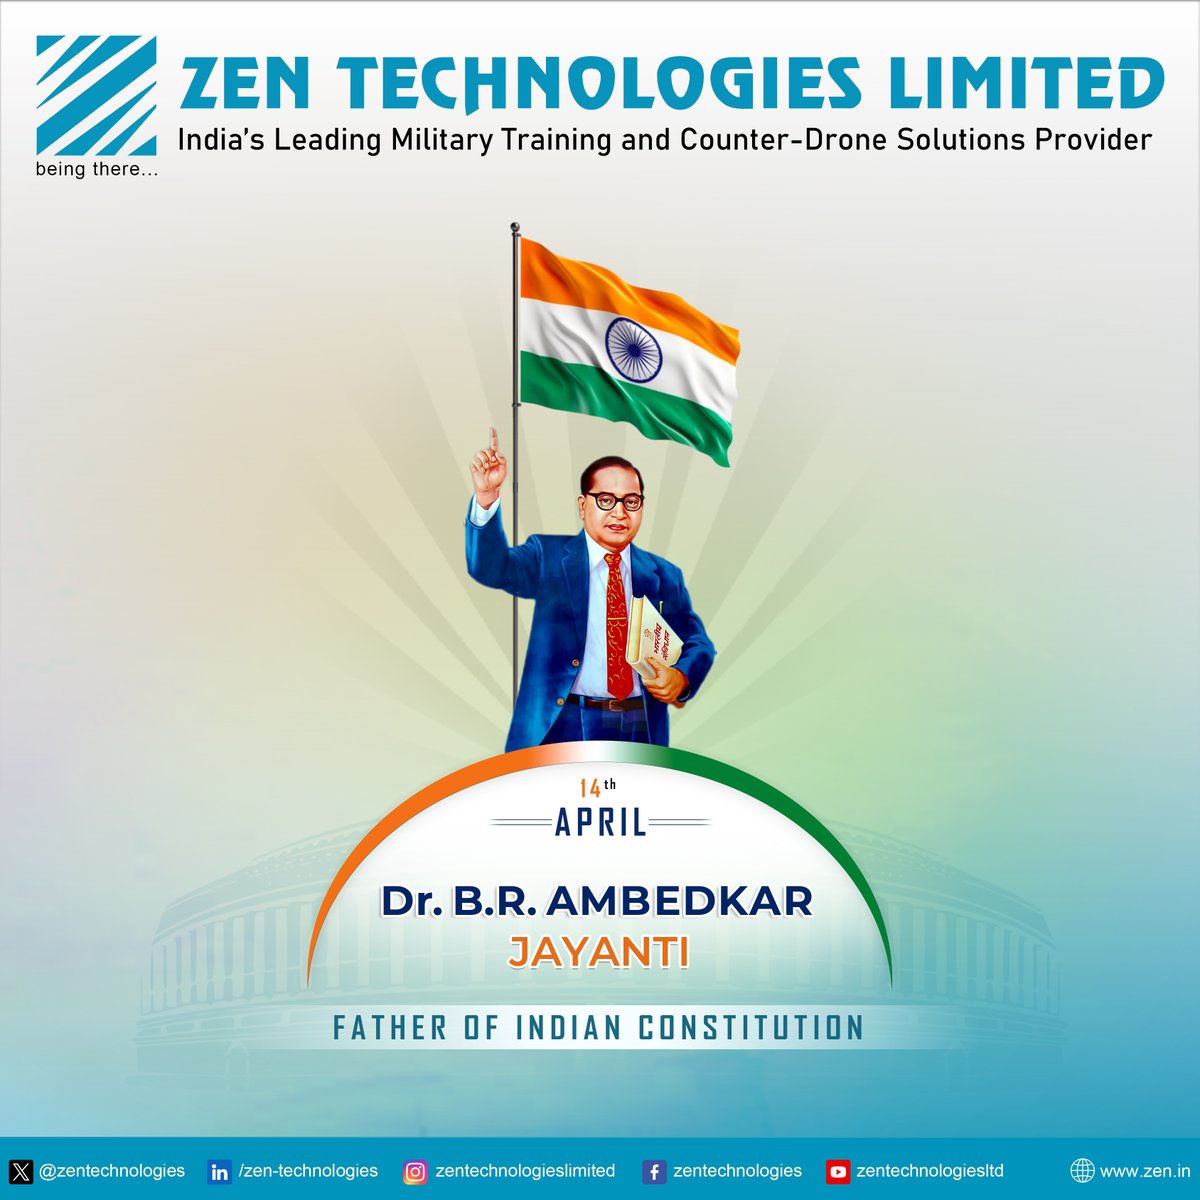 Honoring #AmbedkarJayanti with solemn gratitude. @zentechnologies pays homage to Dr. B.R. Ambedkar, A Stalwart Advocate of #SocialJustice, #Equality, and #HumanRights. Let's emulate his vision for a fairer society and advocate for #BetterTomorrow. #IndianConstitution